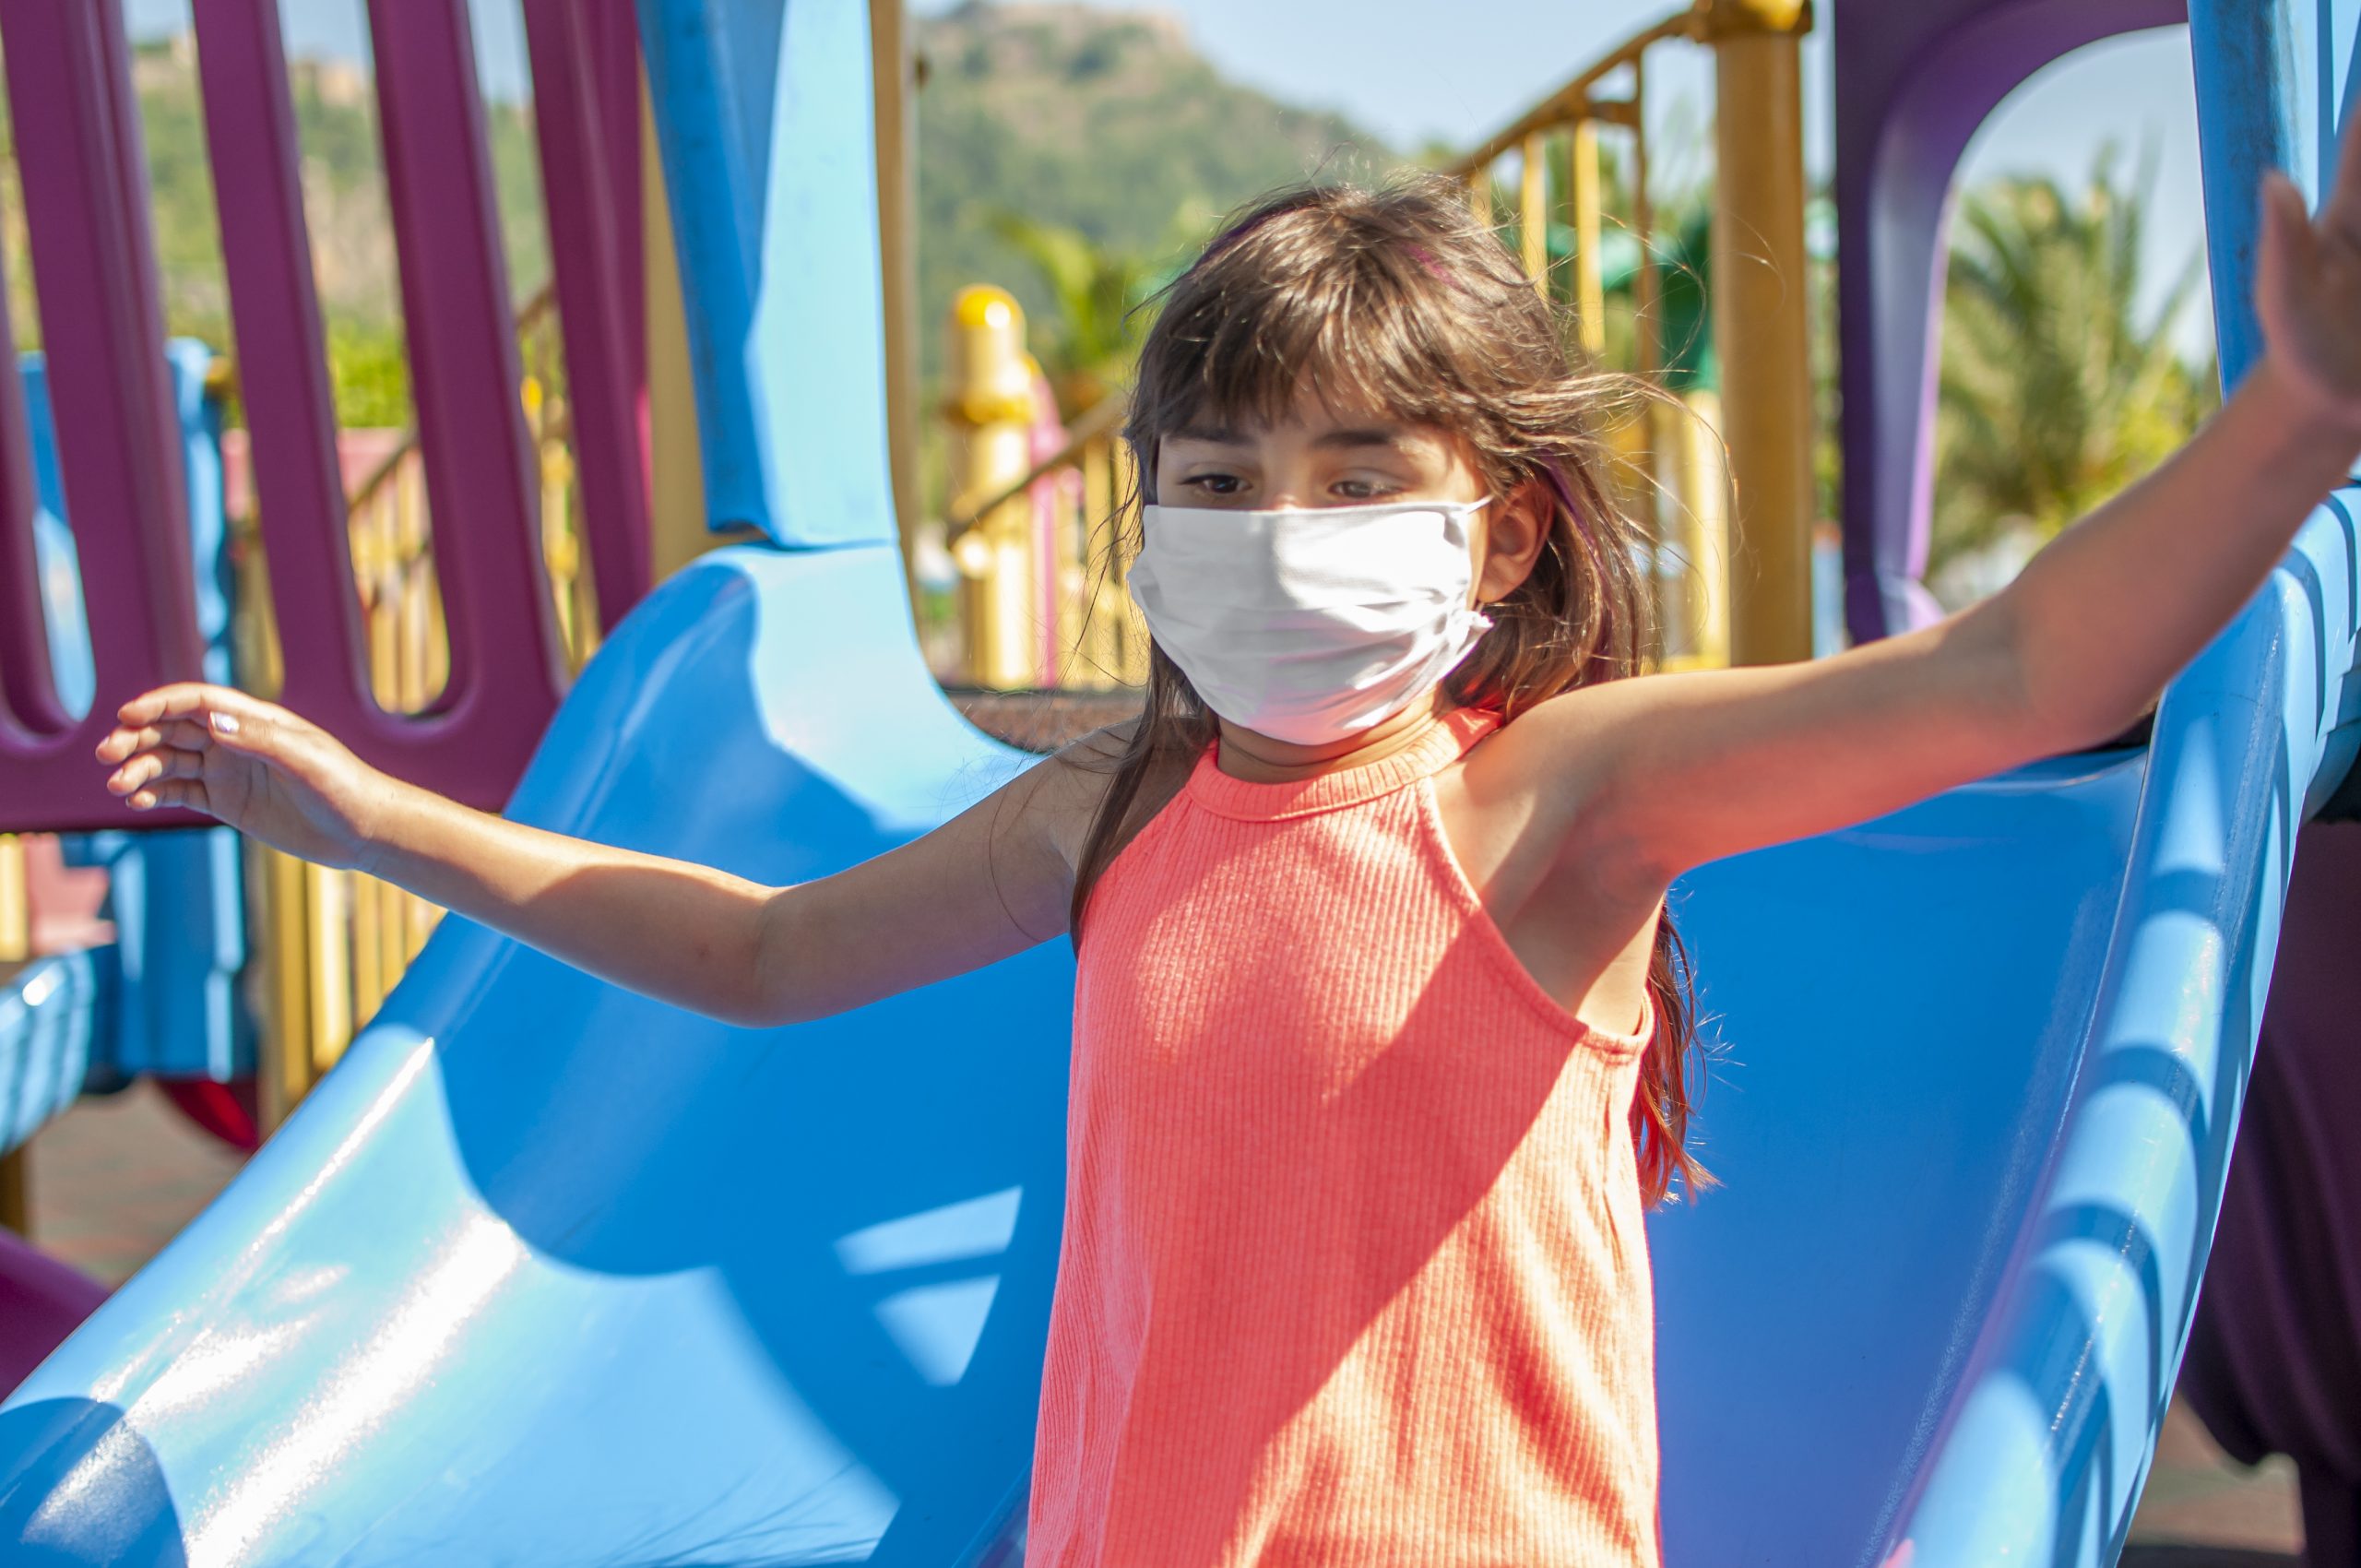 Pediatricians' Top 5 Playground Safety Tips